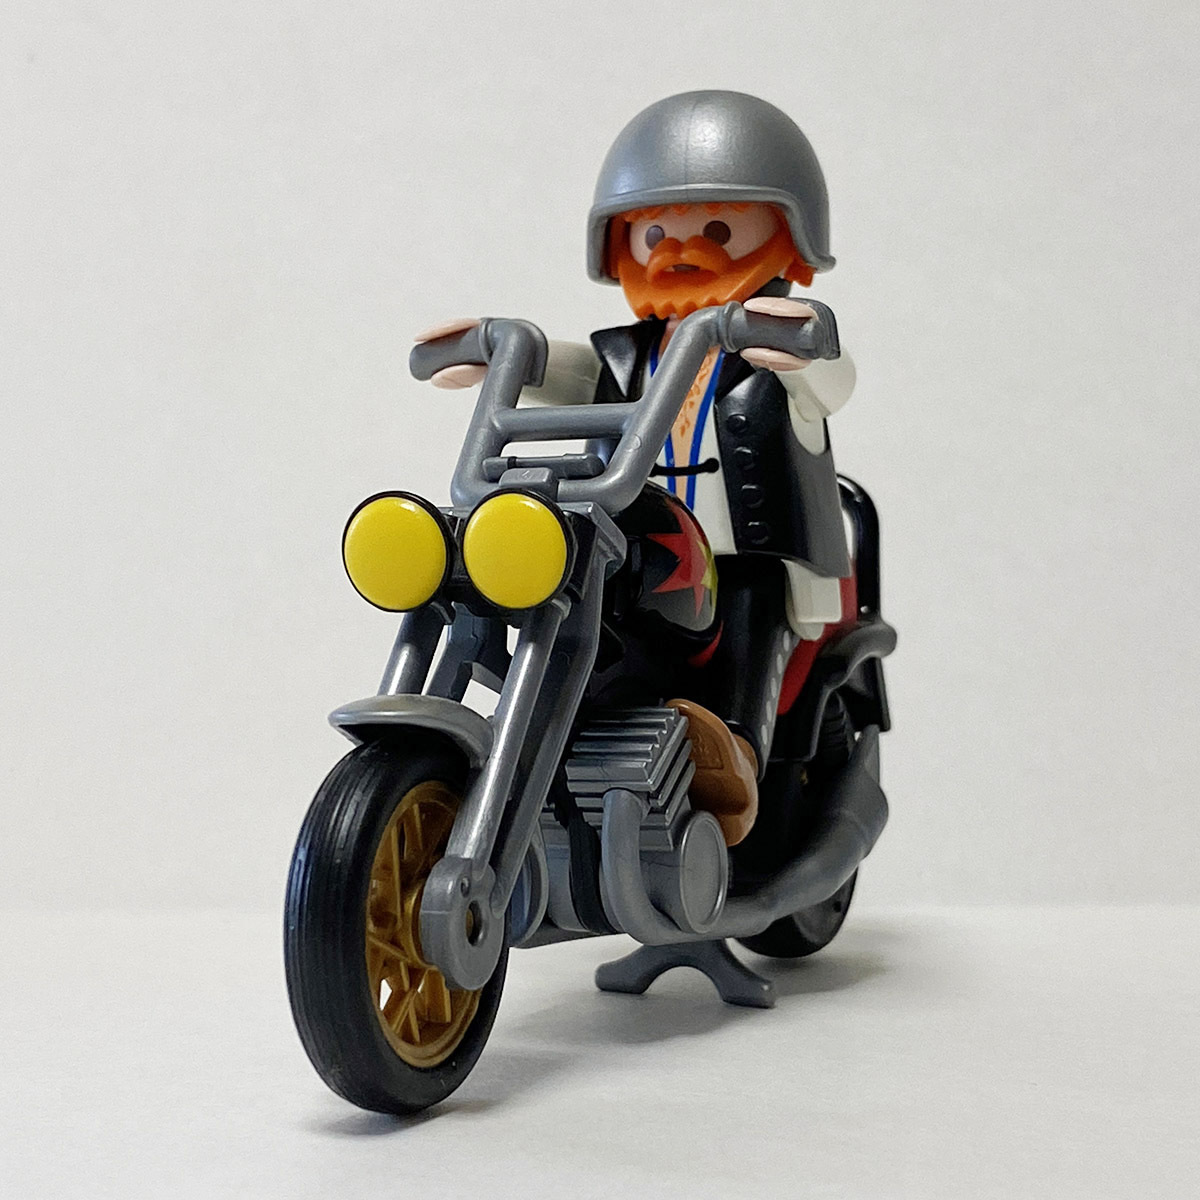 playmobil 3831 Play Mobil chopper * rider Chopper Rider bike motorcycle out of print waste number box attaching secondhand goods 